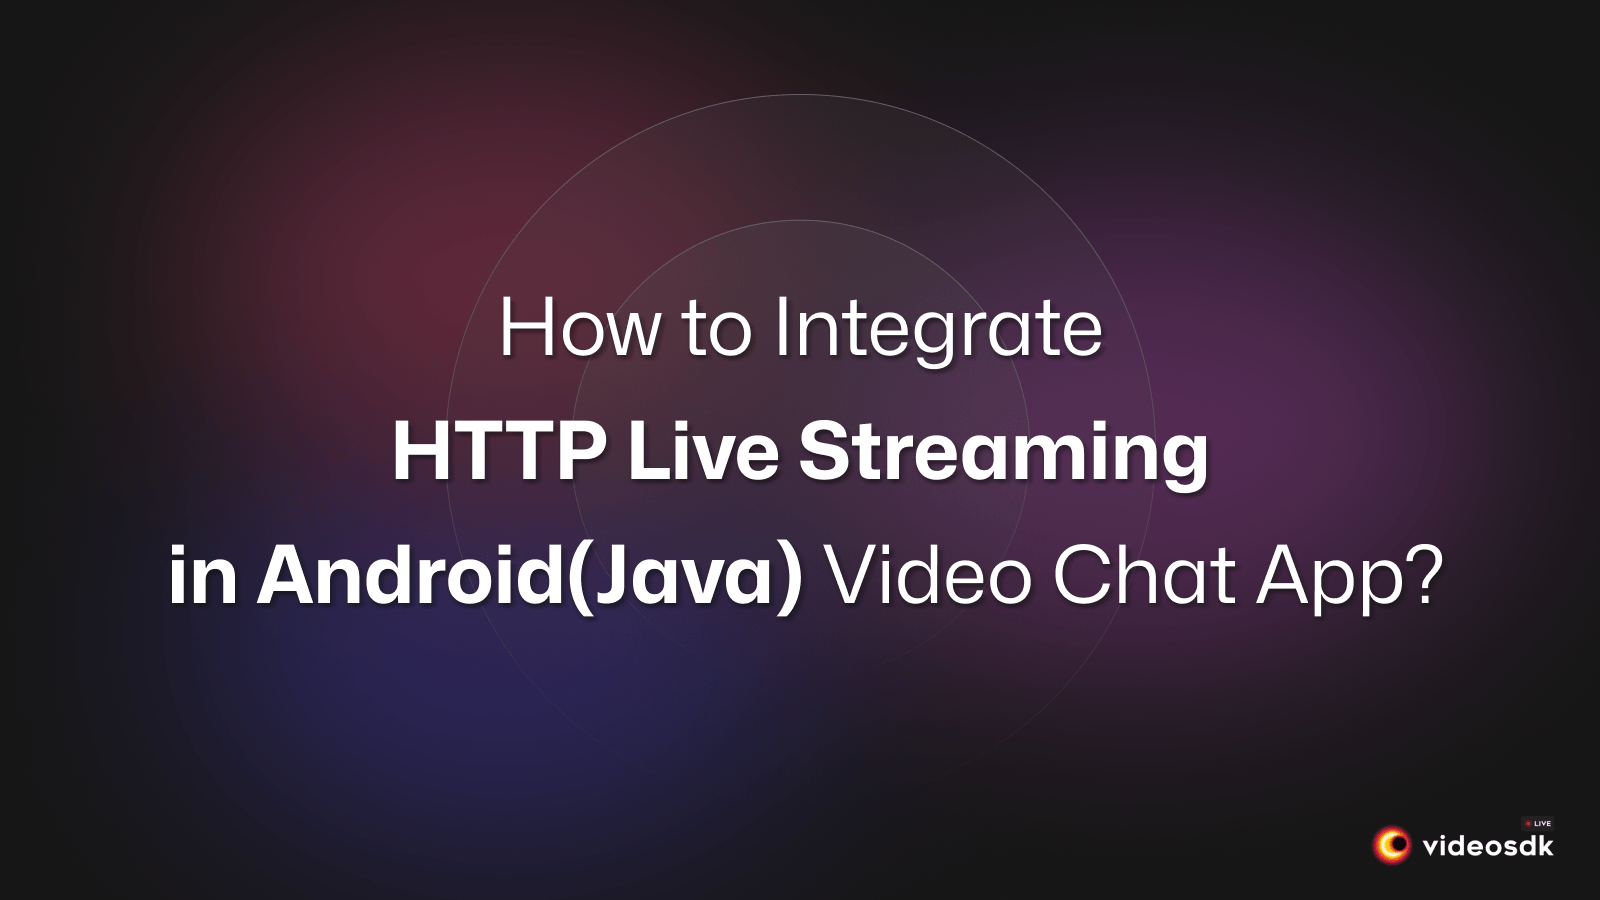 How to Build an Android Live Streaming Video Chat App in Java?